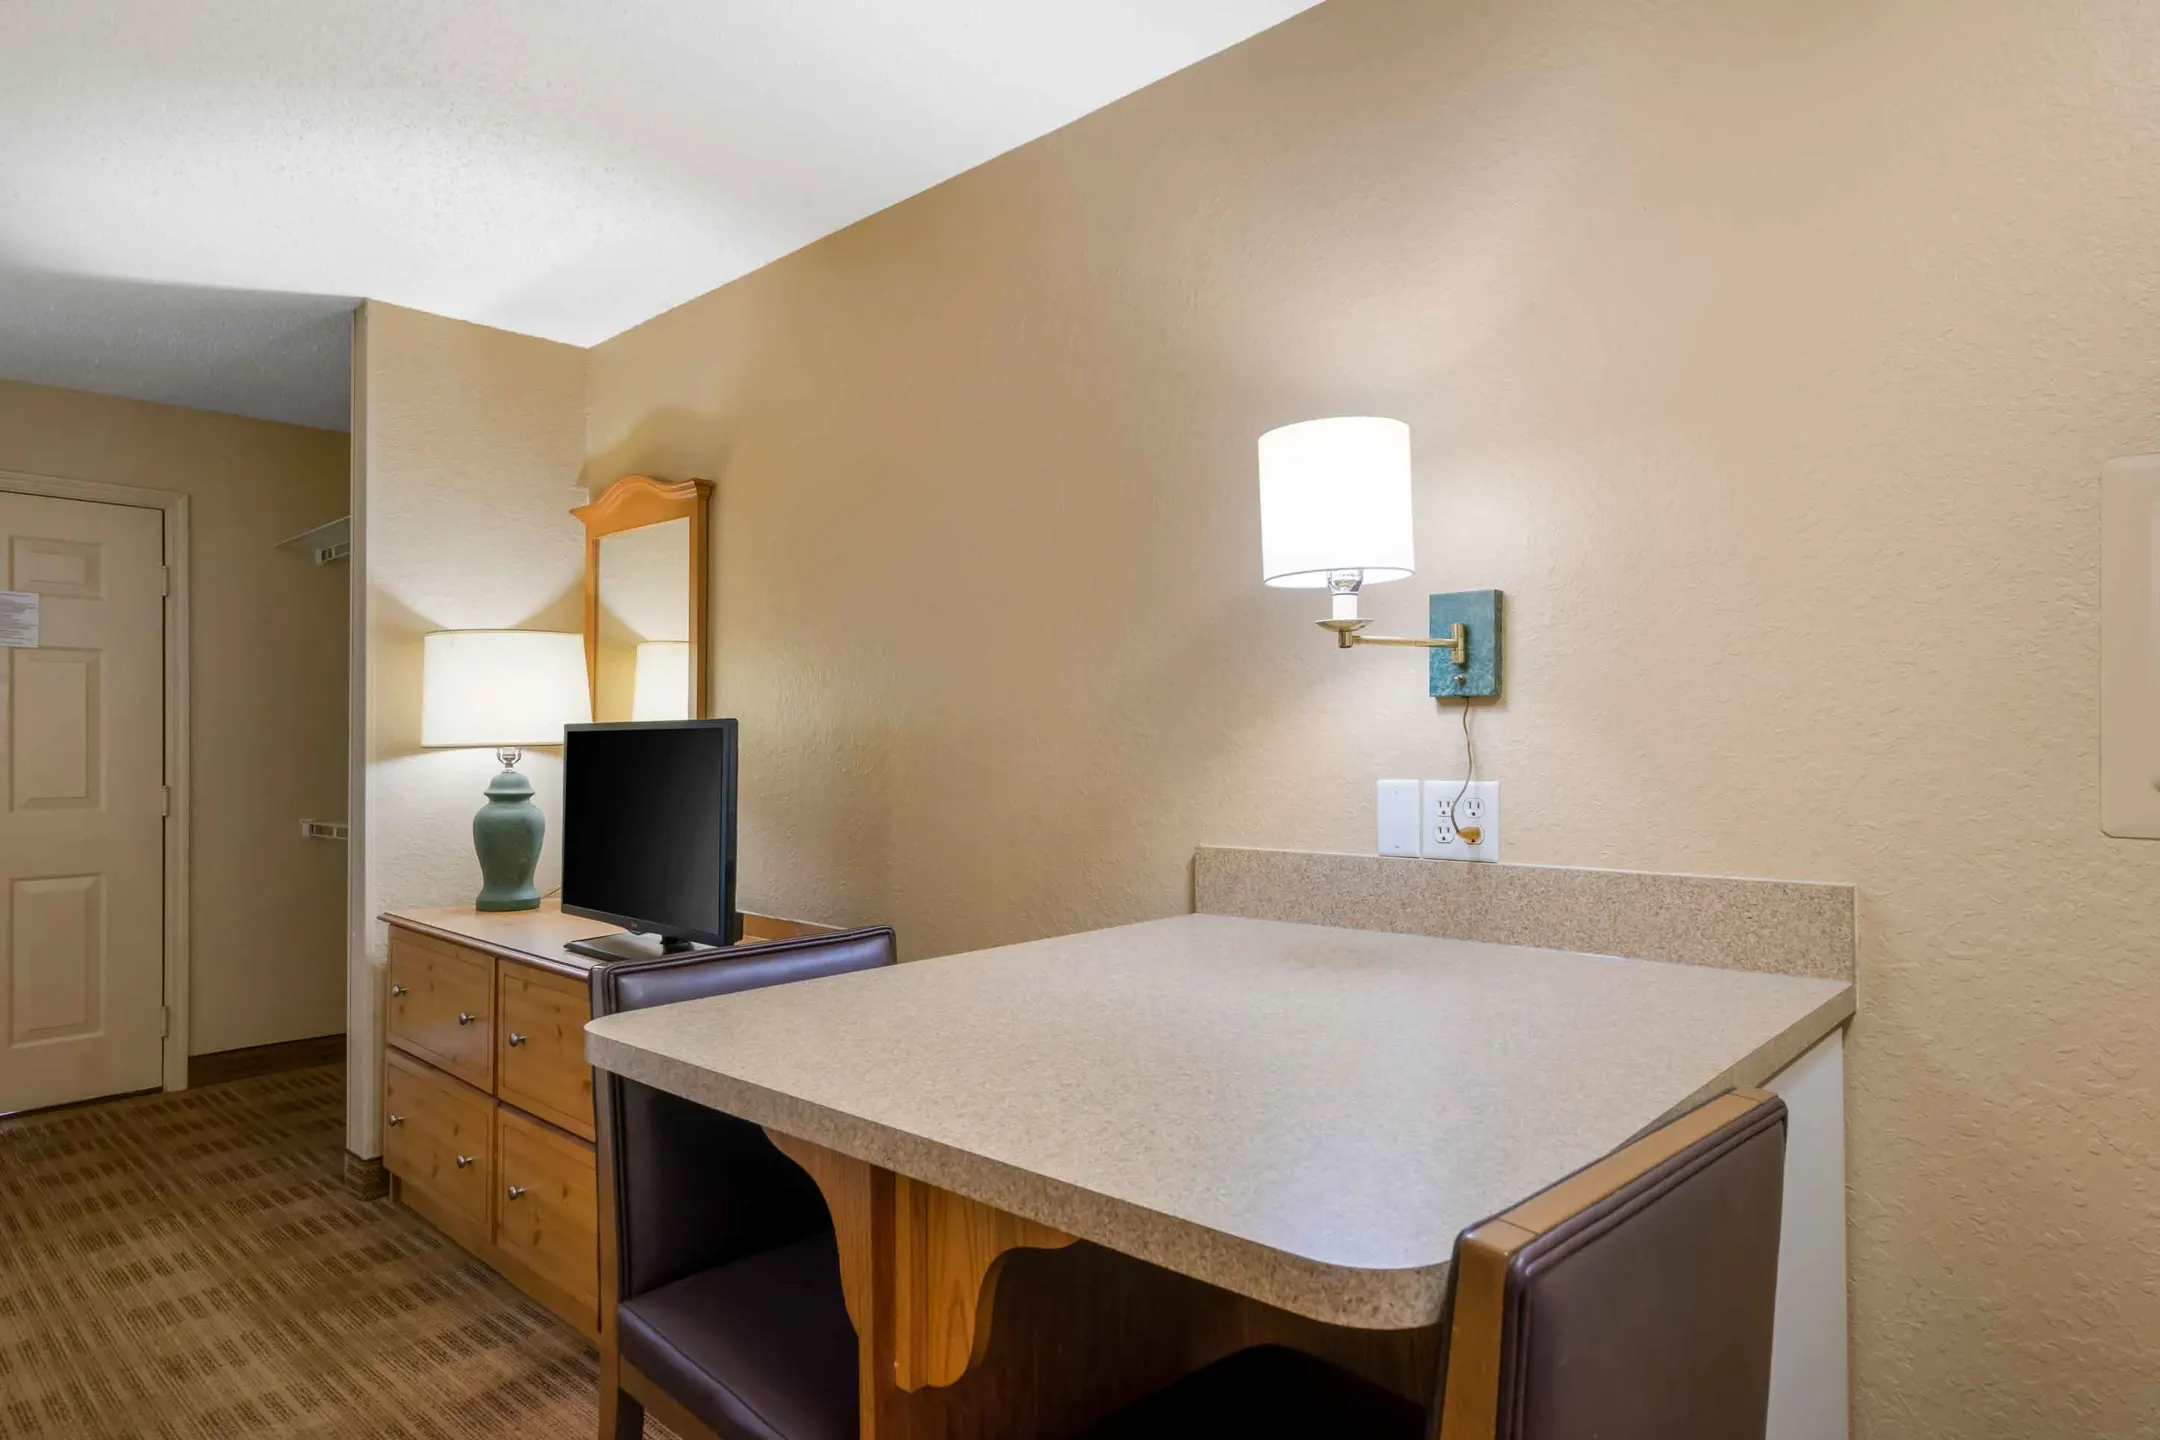 Dining Room - Furnished Studio - Clearwater - Carillon Park - Clearwater, FL